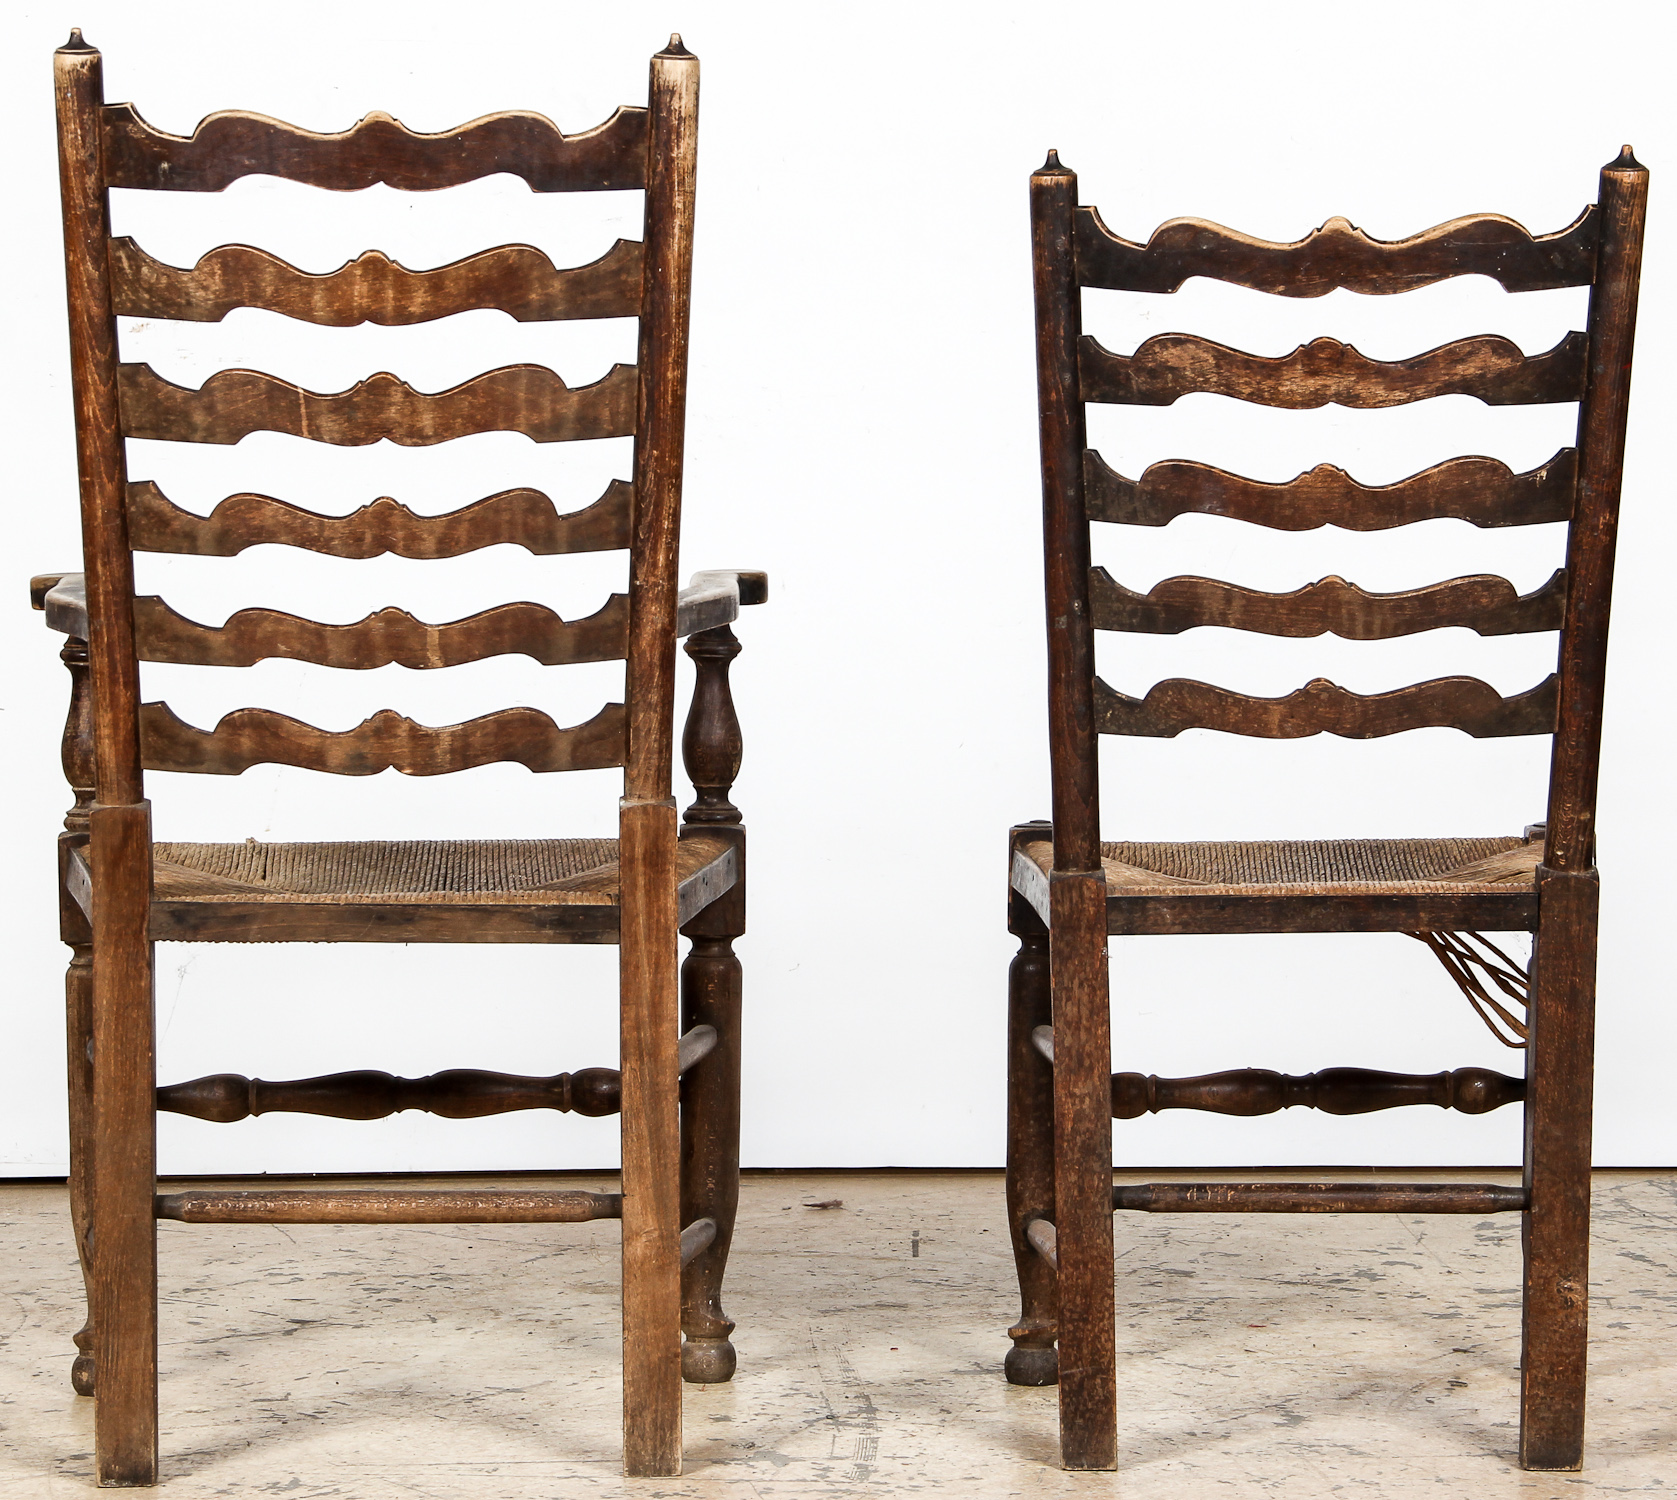 6 Antique Queen Anne Style Ladder Back Chairs. Each Size: 42.5" x 23.5" x 21.5" (108 x 60 x 55 - Image 4 of 4